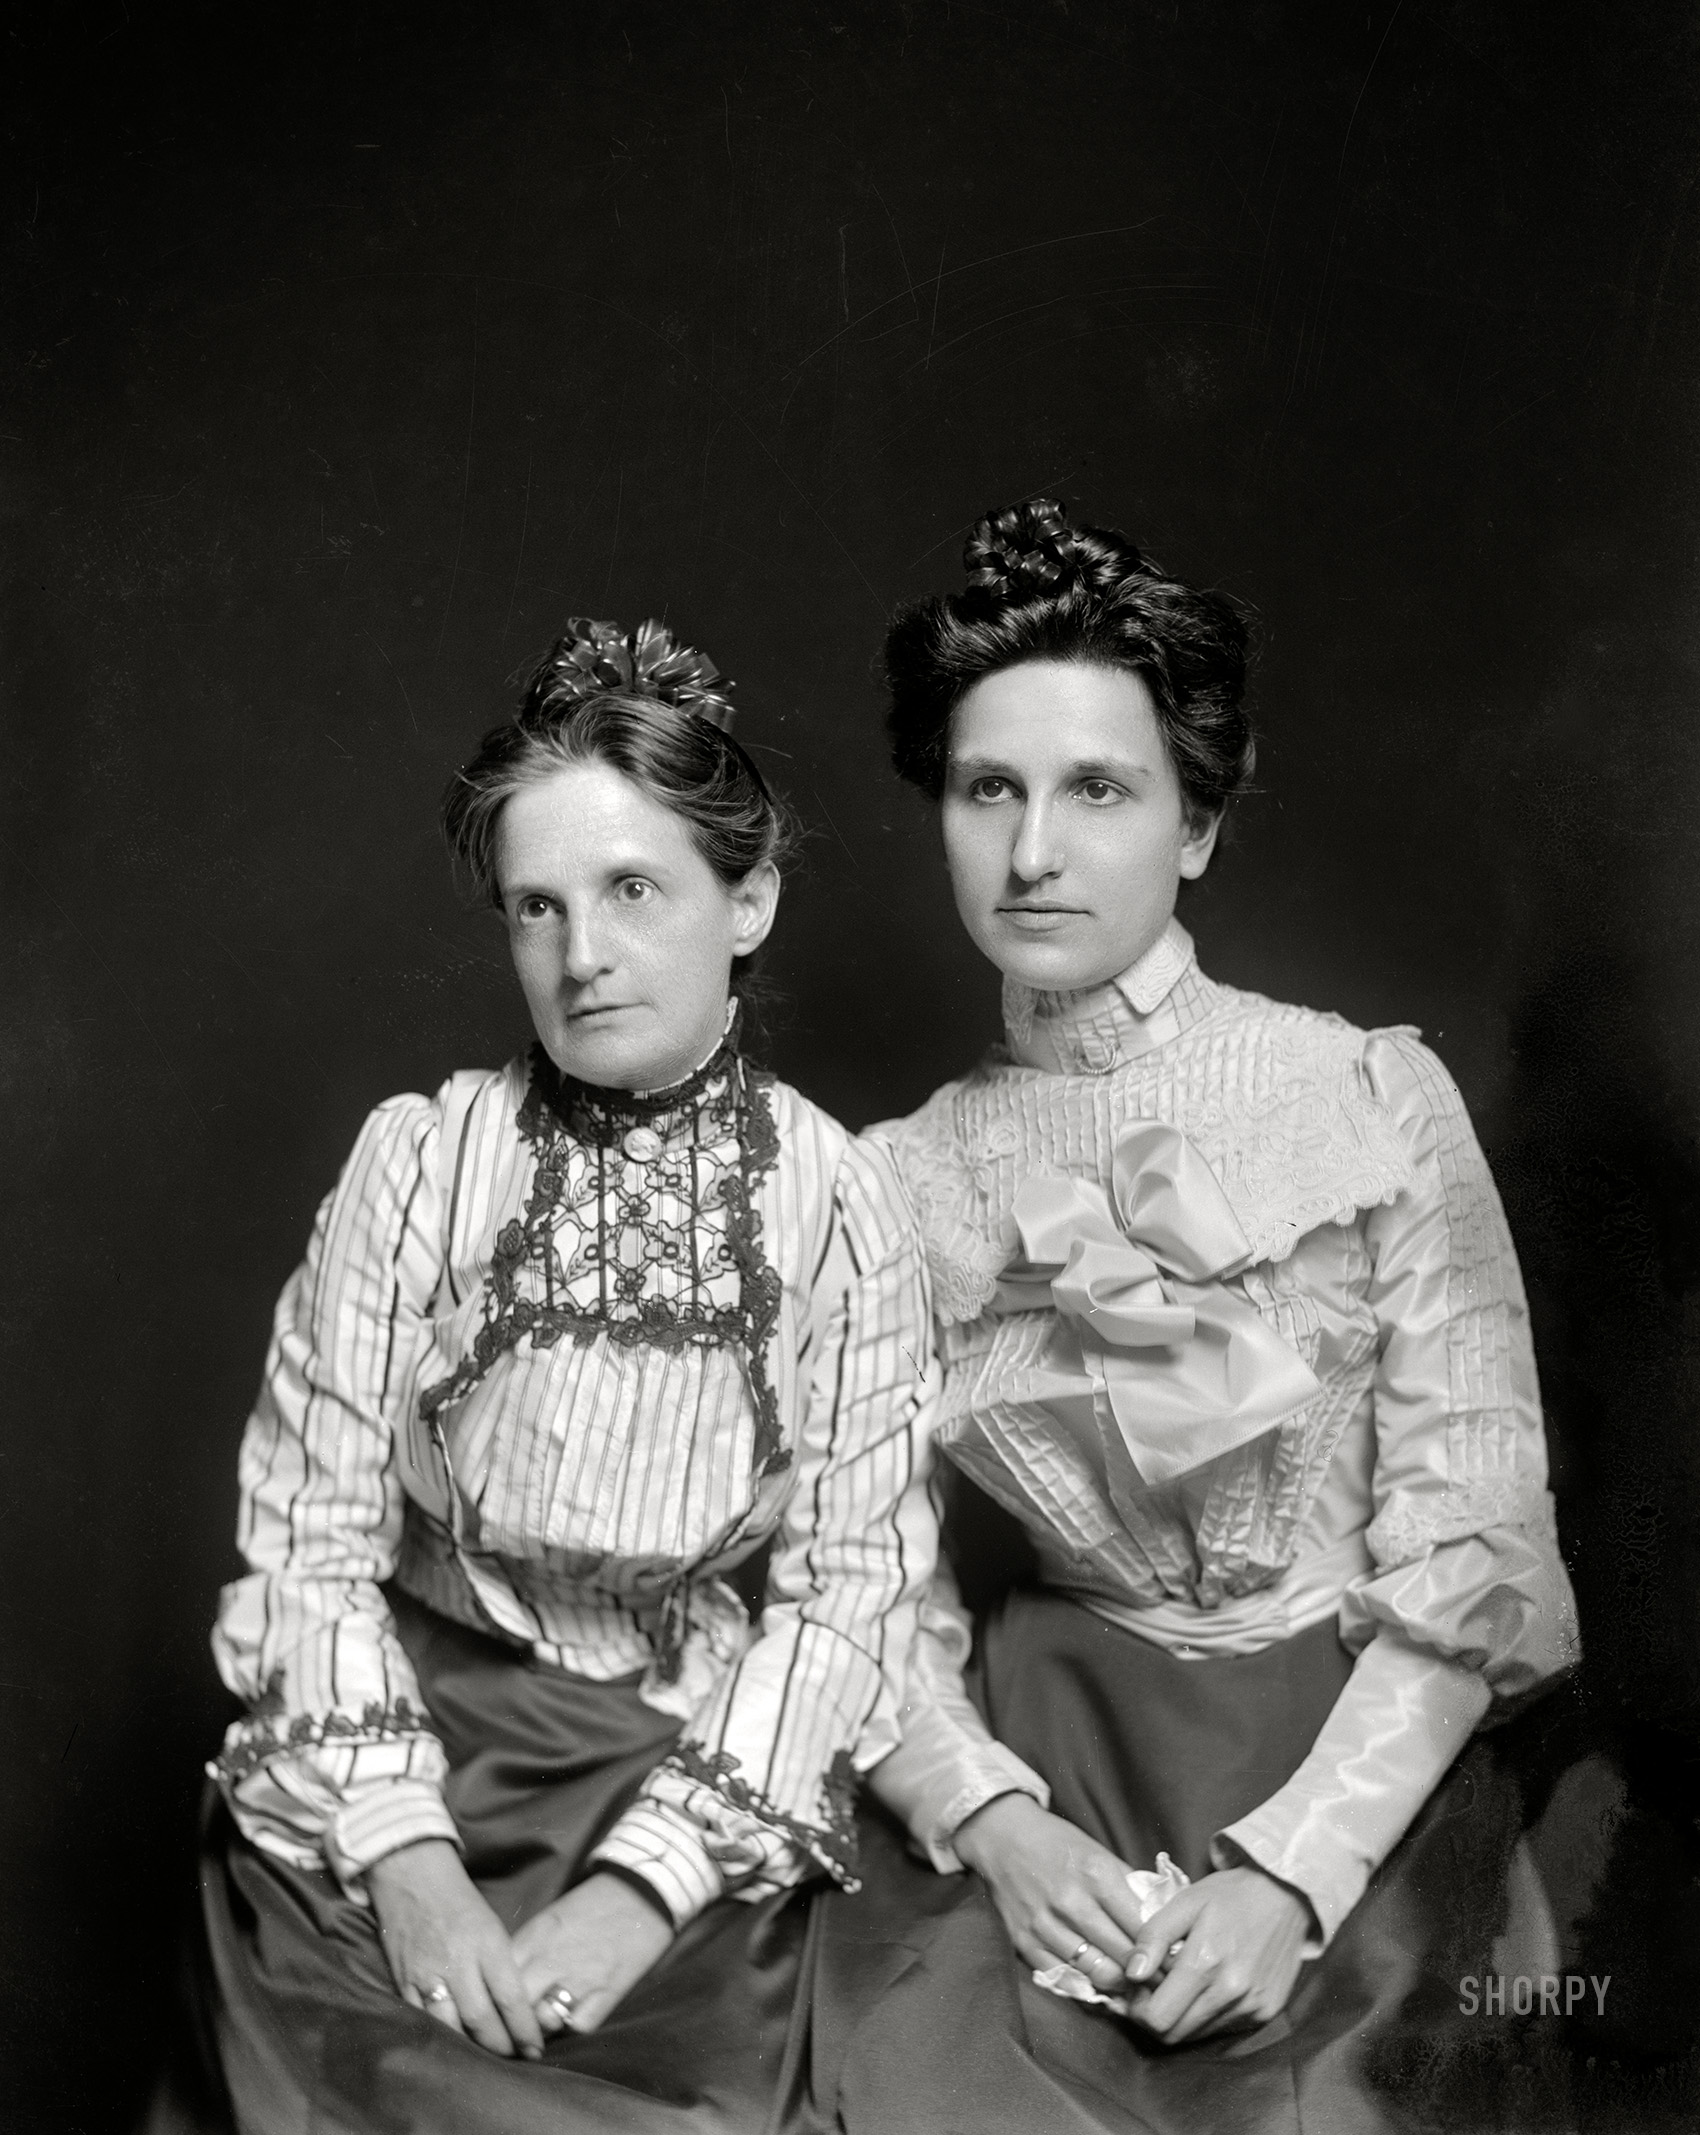 Washington, D.C., between February 1901 and December 1903. "Wink, Longley (crosswise)." 5x7 glass negative from the C.M. Bell portrait studio. View full size.